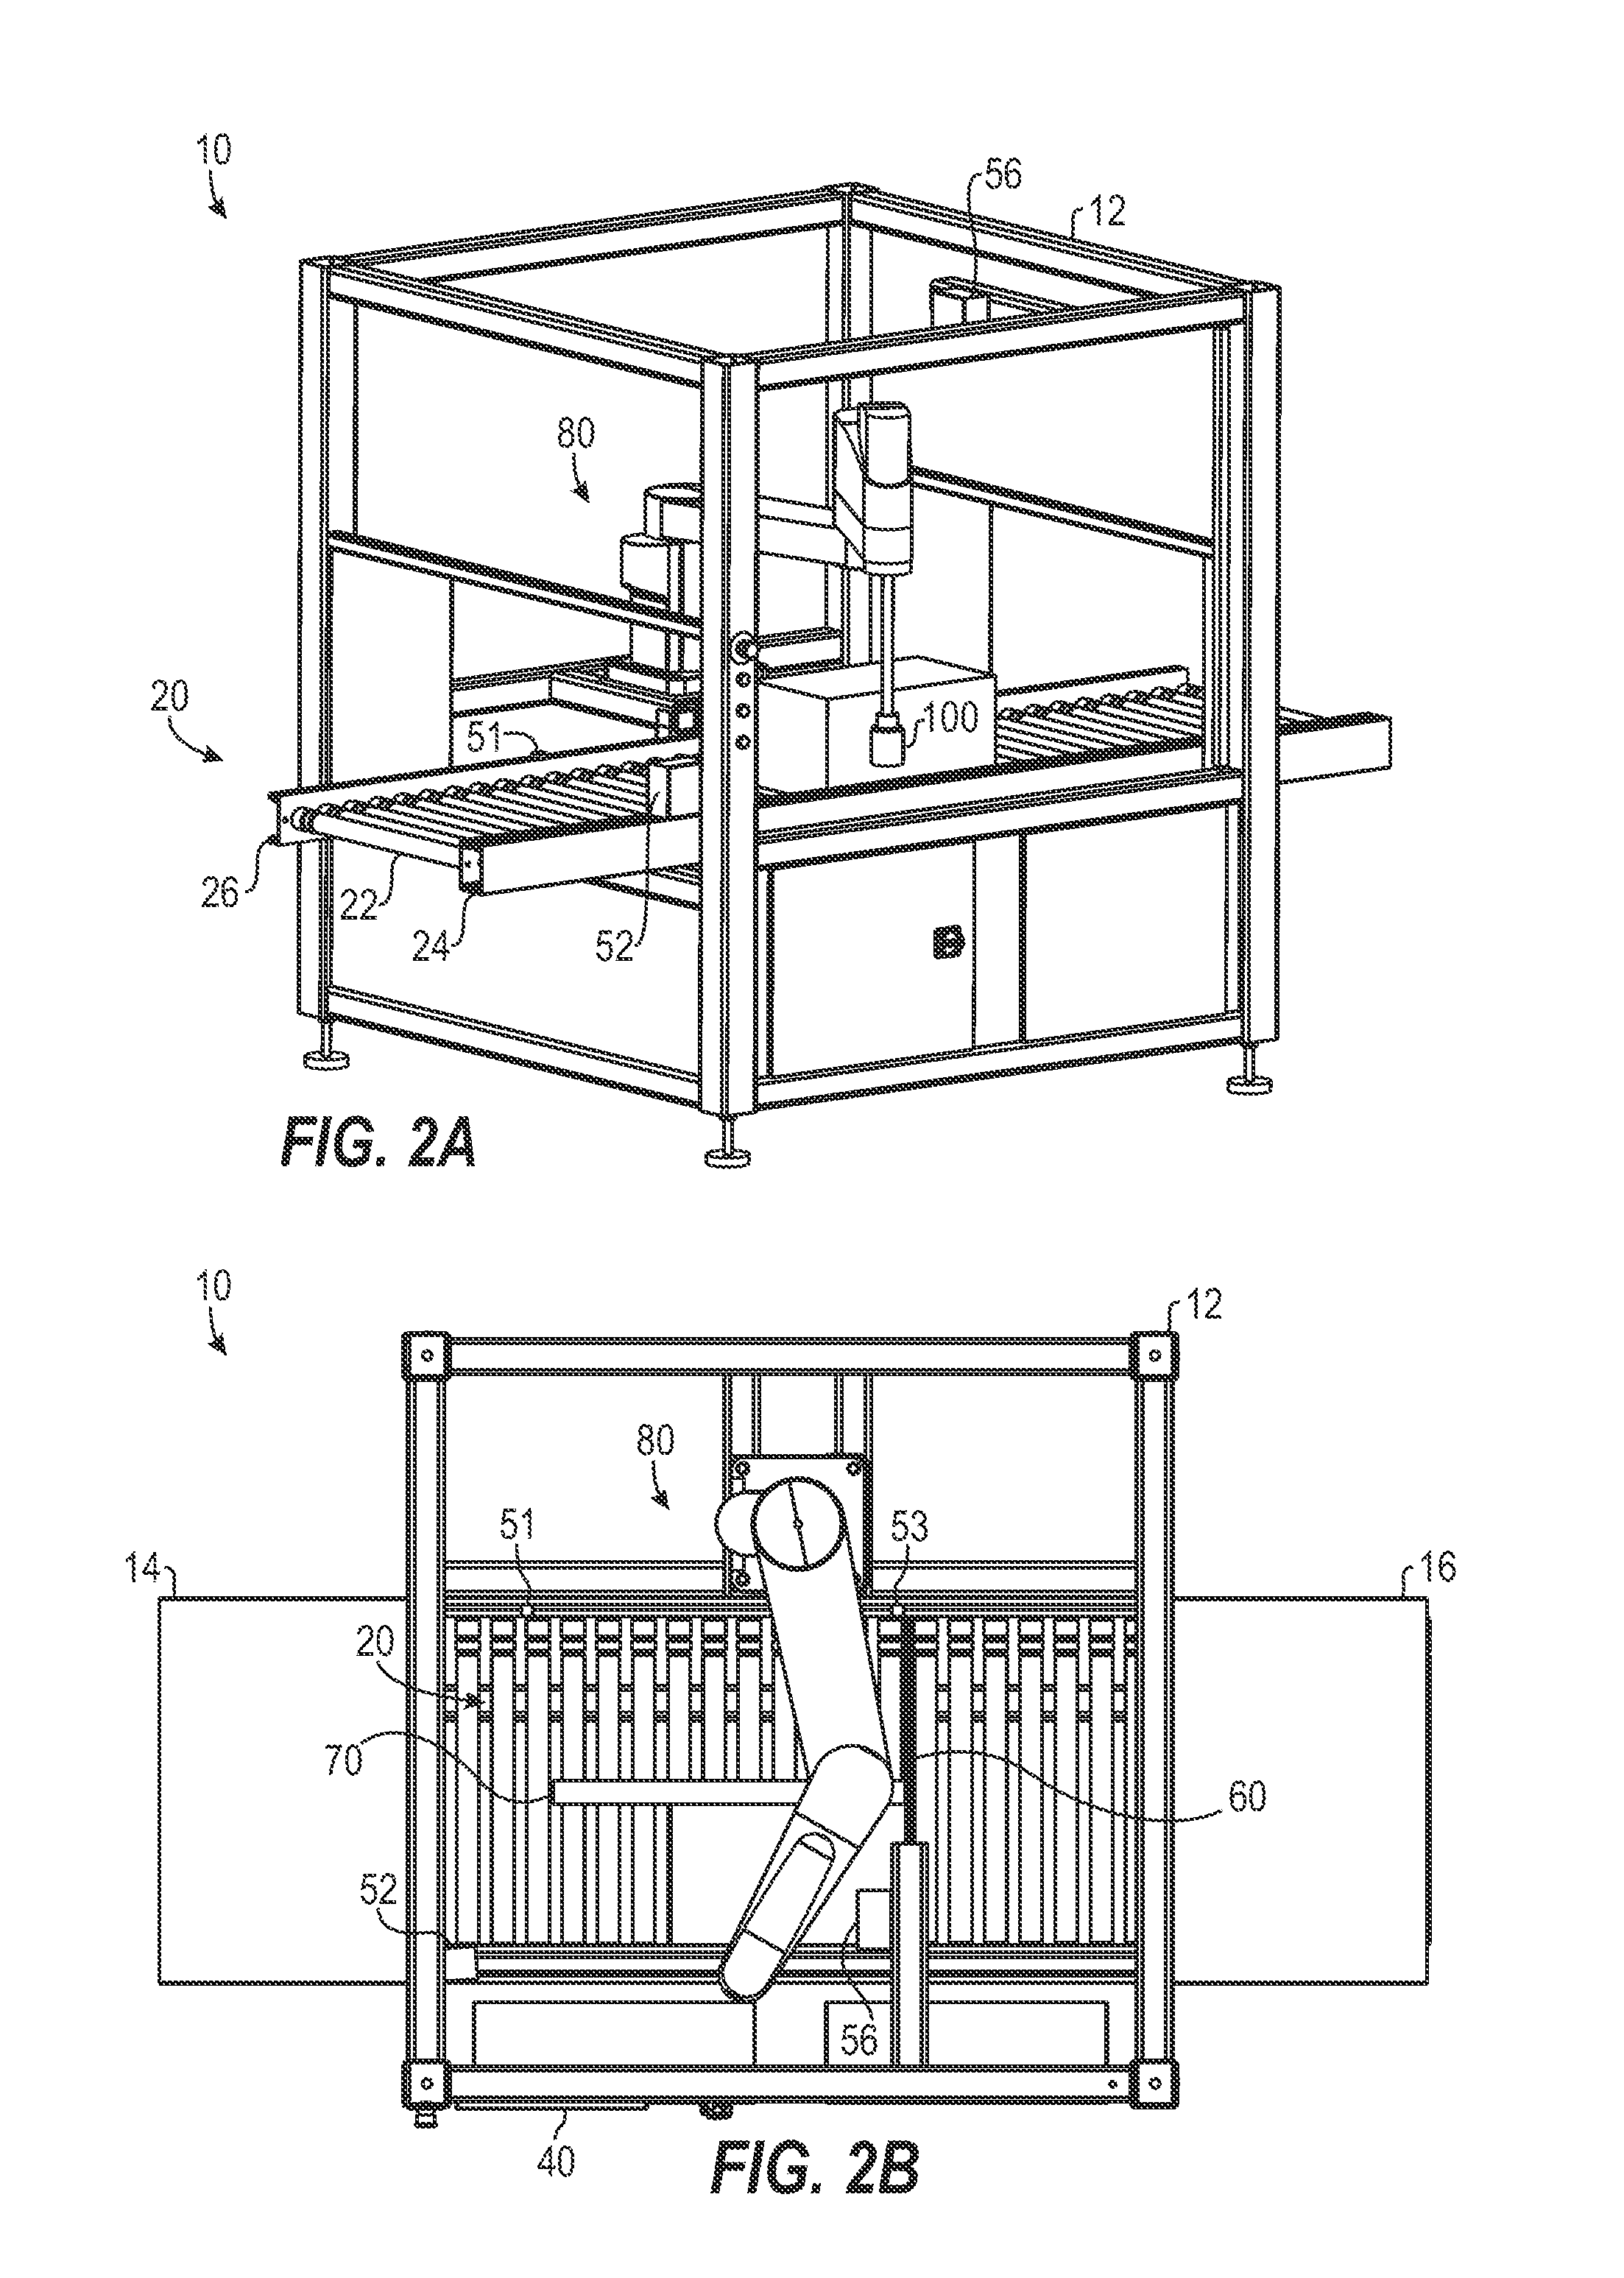 Automated box opening apparatus